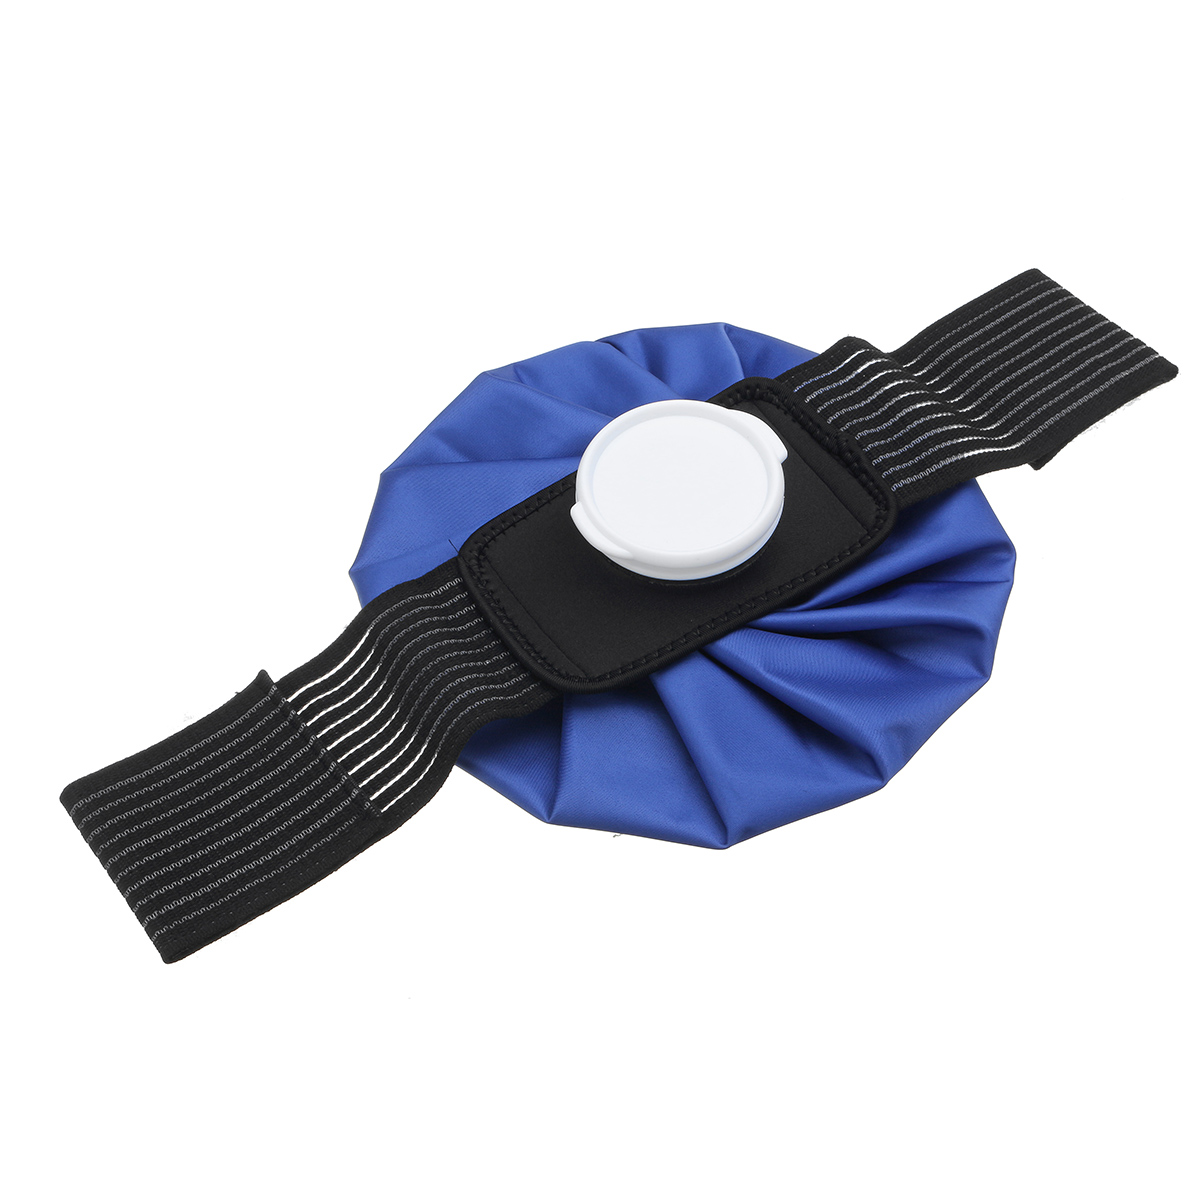 Ice-Bag-Pack-Pain-Relief-Cold-Broad-Knee-Shoulder-Injuries-Therapy-Strap-Wrap-Elastic-Tie-Belt-1551776-3